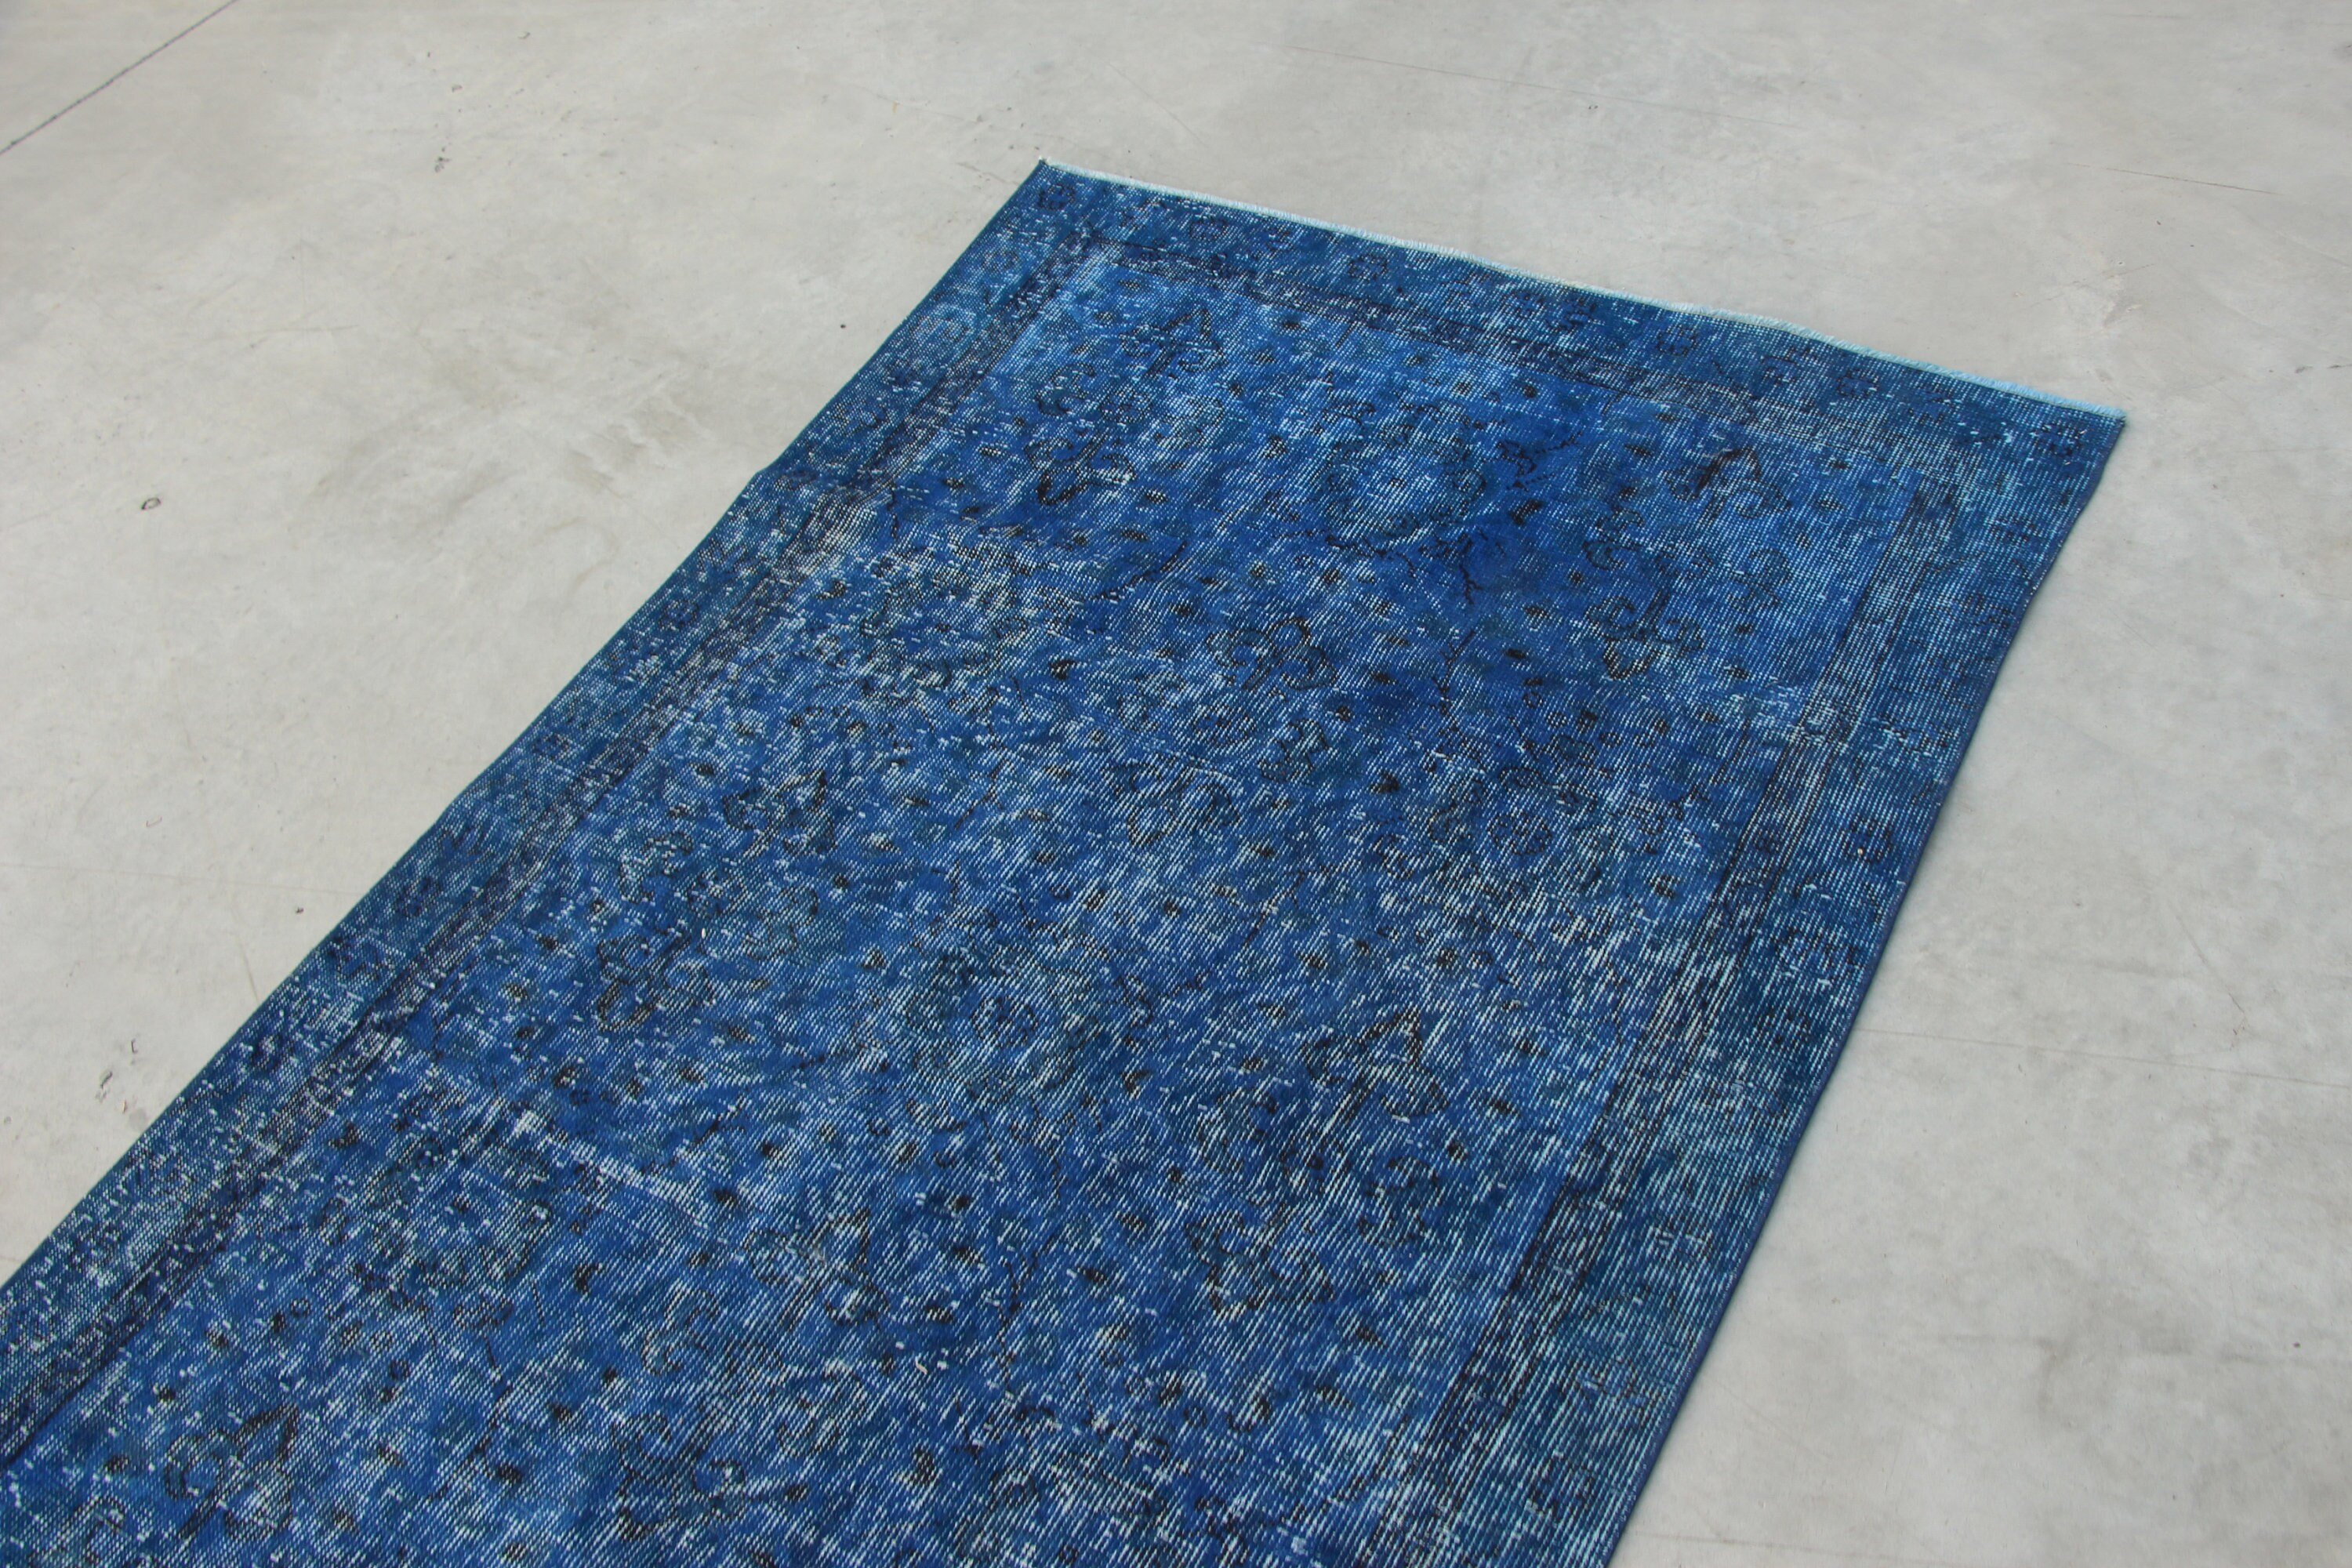 Turkish Rug, Rugs for Kitchen, Blue Moroccan Rug, Kitchen Rug, Antique Rugs, 3.6x6.6 ft Accent Rugs, Cool Rug, Nursery Rugs, Vintage Rug